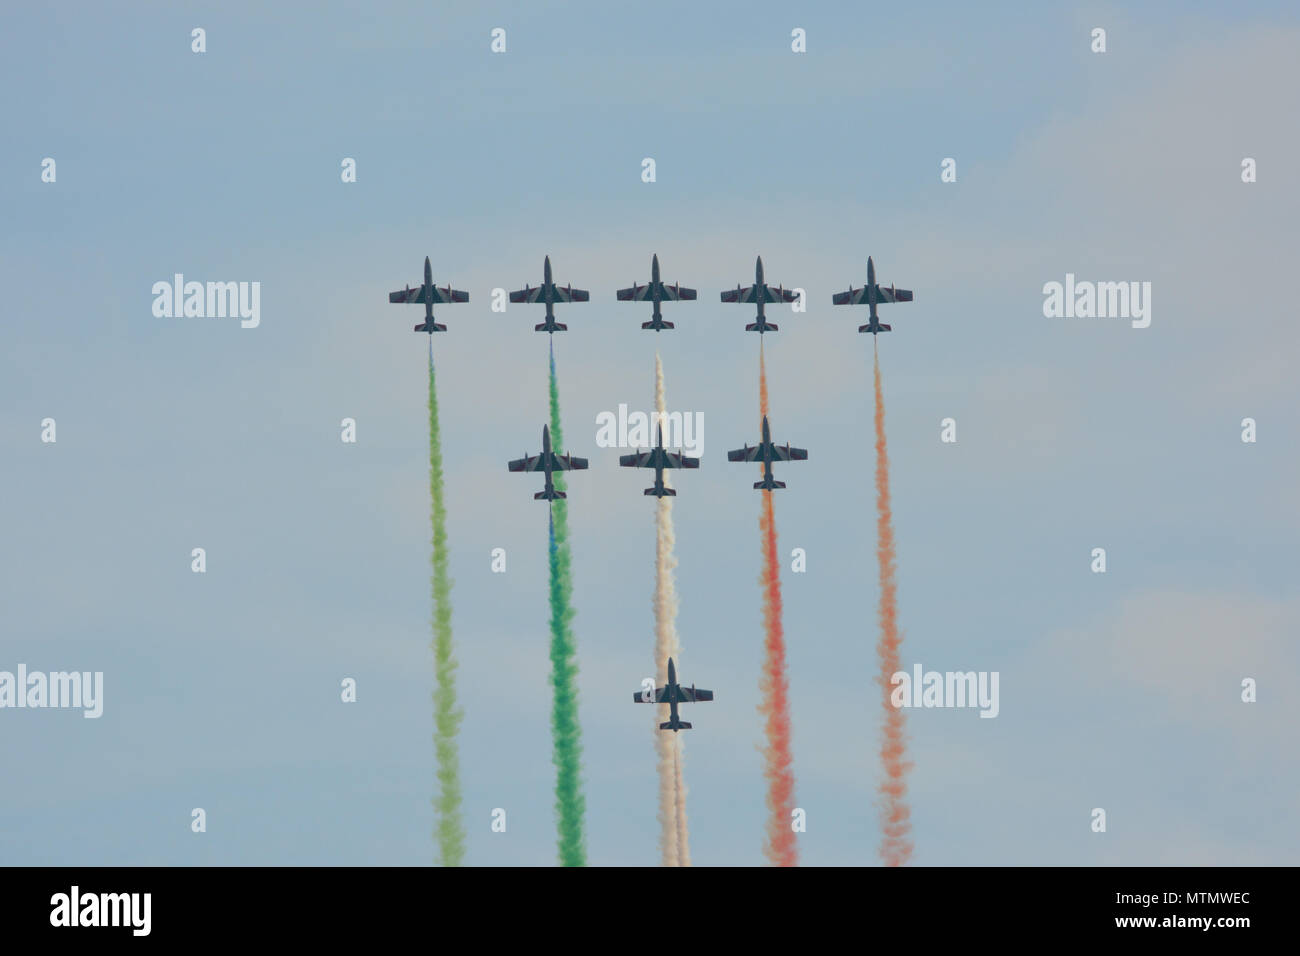 Airplanes doing stunts at an airshow. Stock Photo